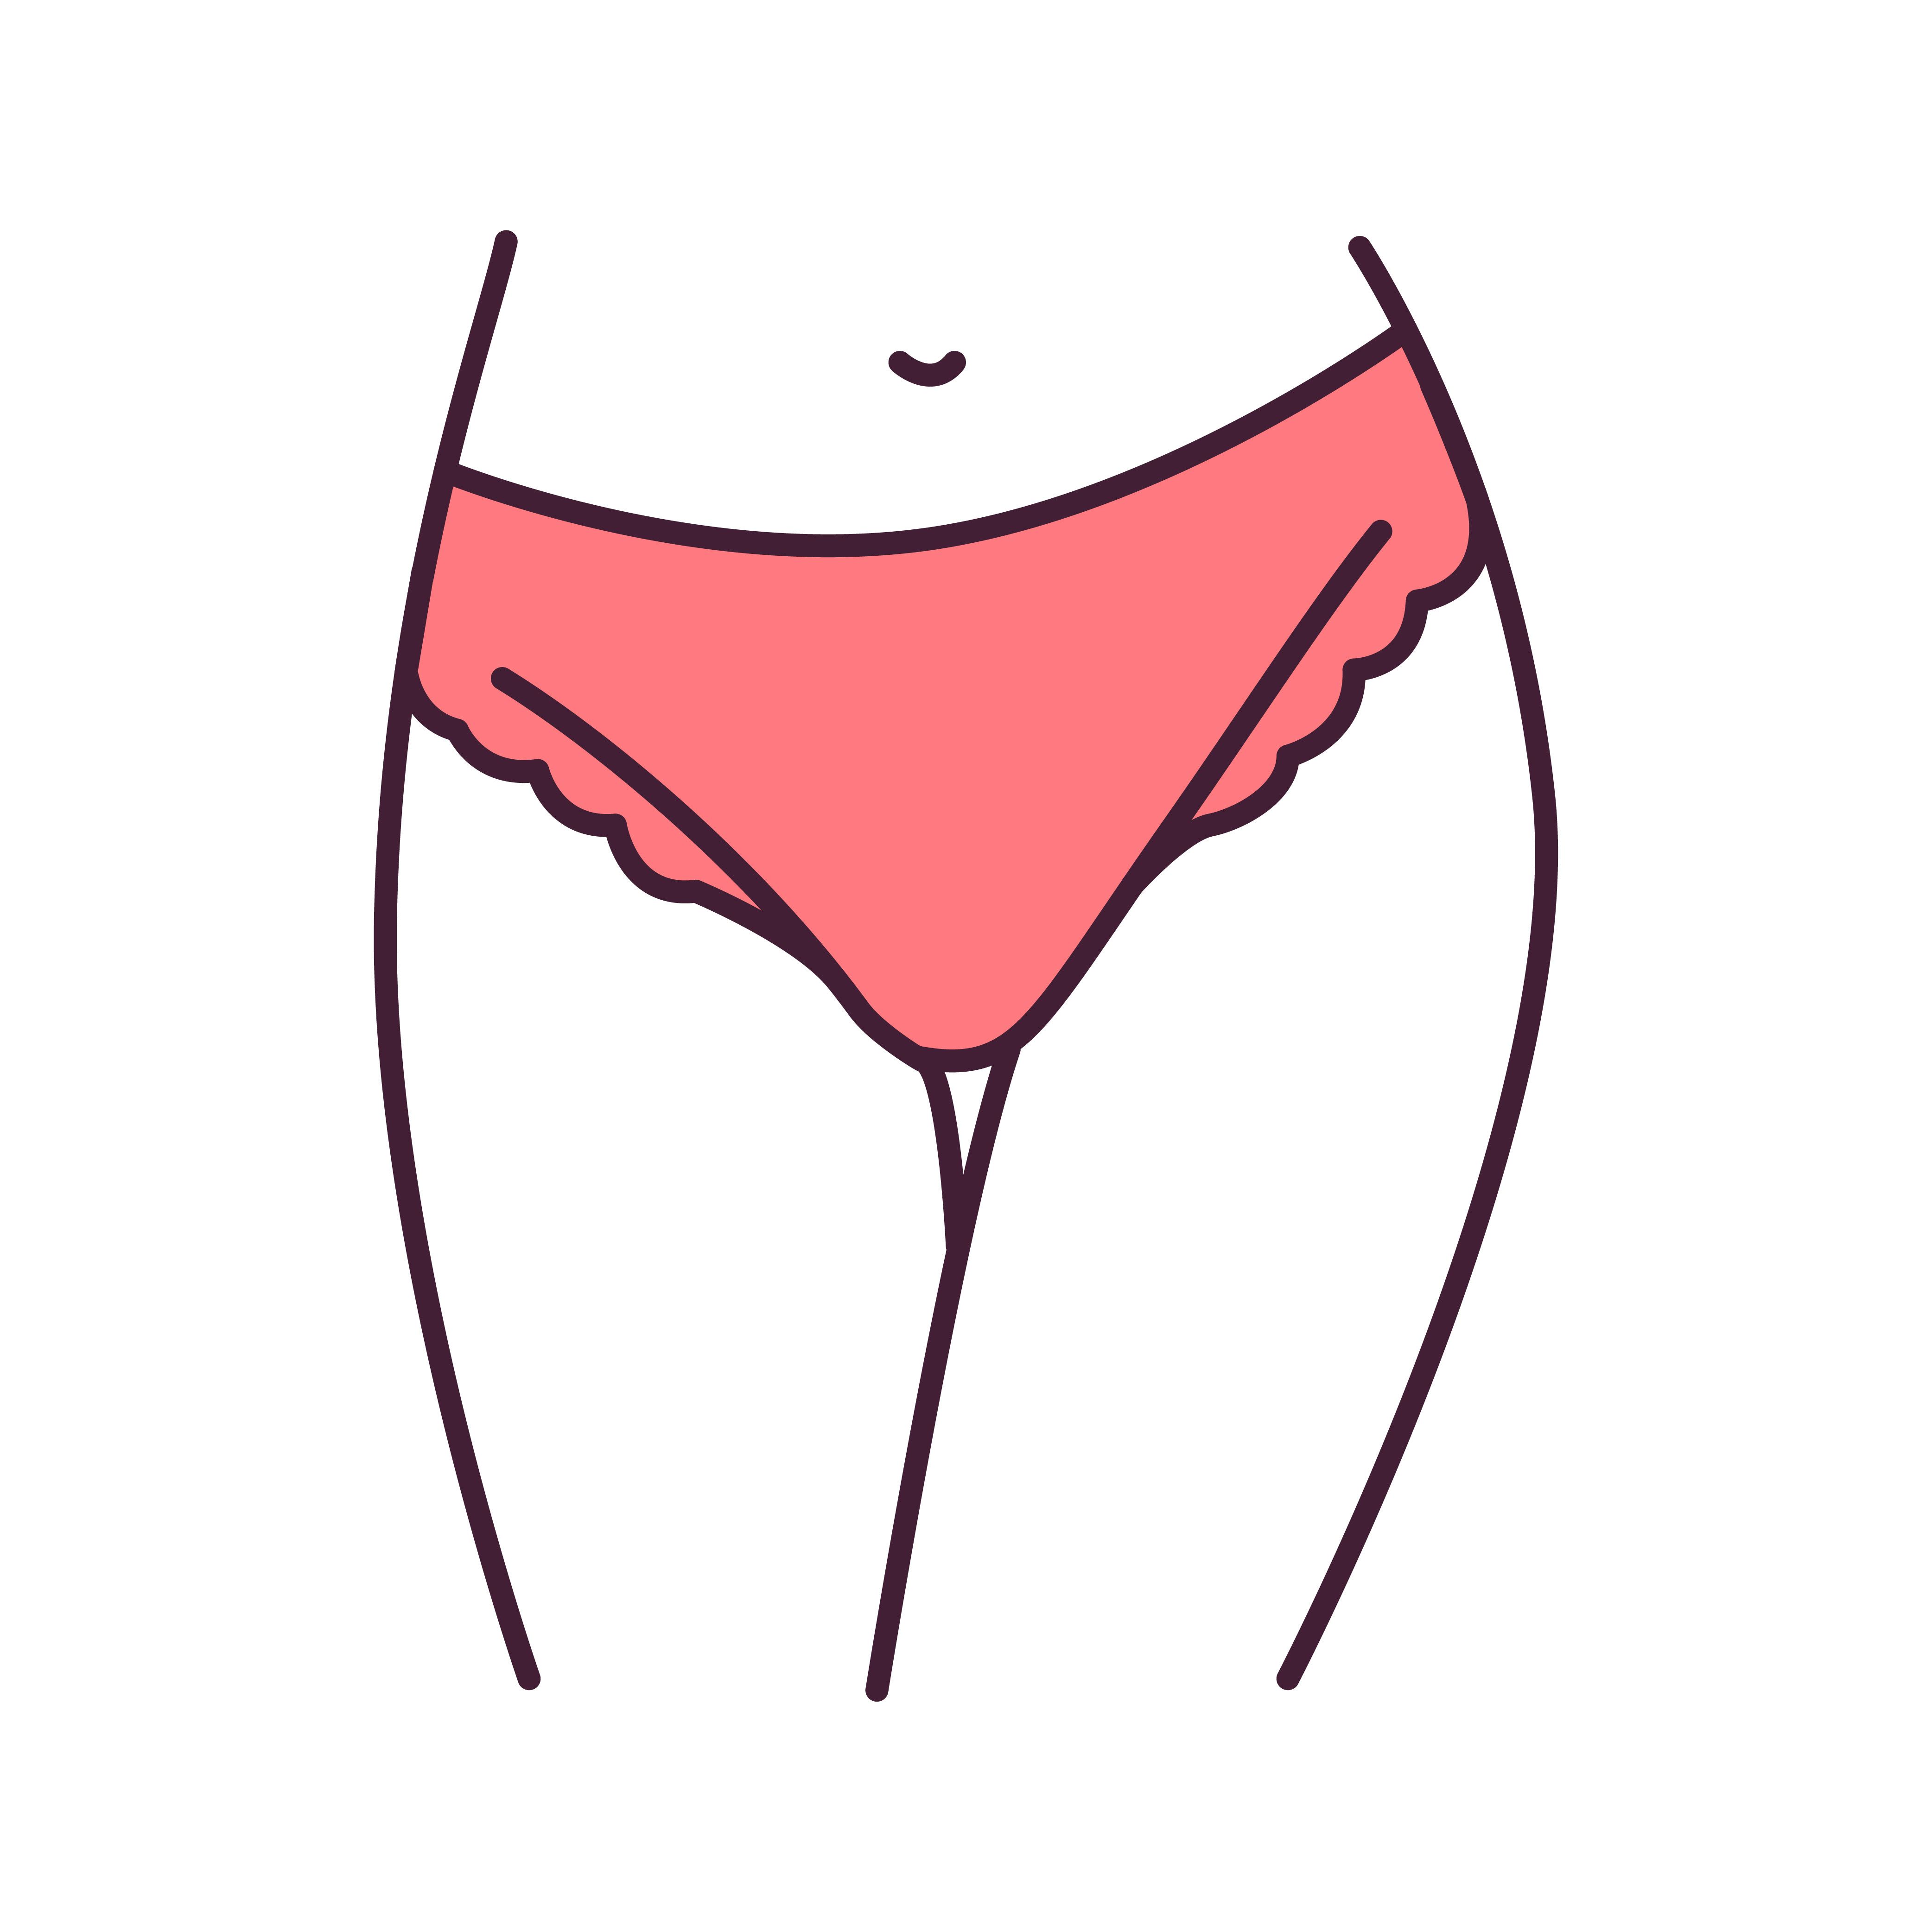 underpants slip lingerie color line icon a type of panties with sides that extend lower down the hips pictogram for web page, mobile app, promo ui ux gui design element editable stroke